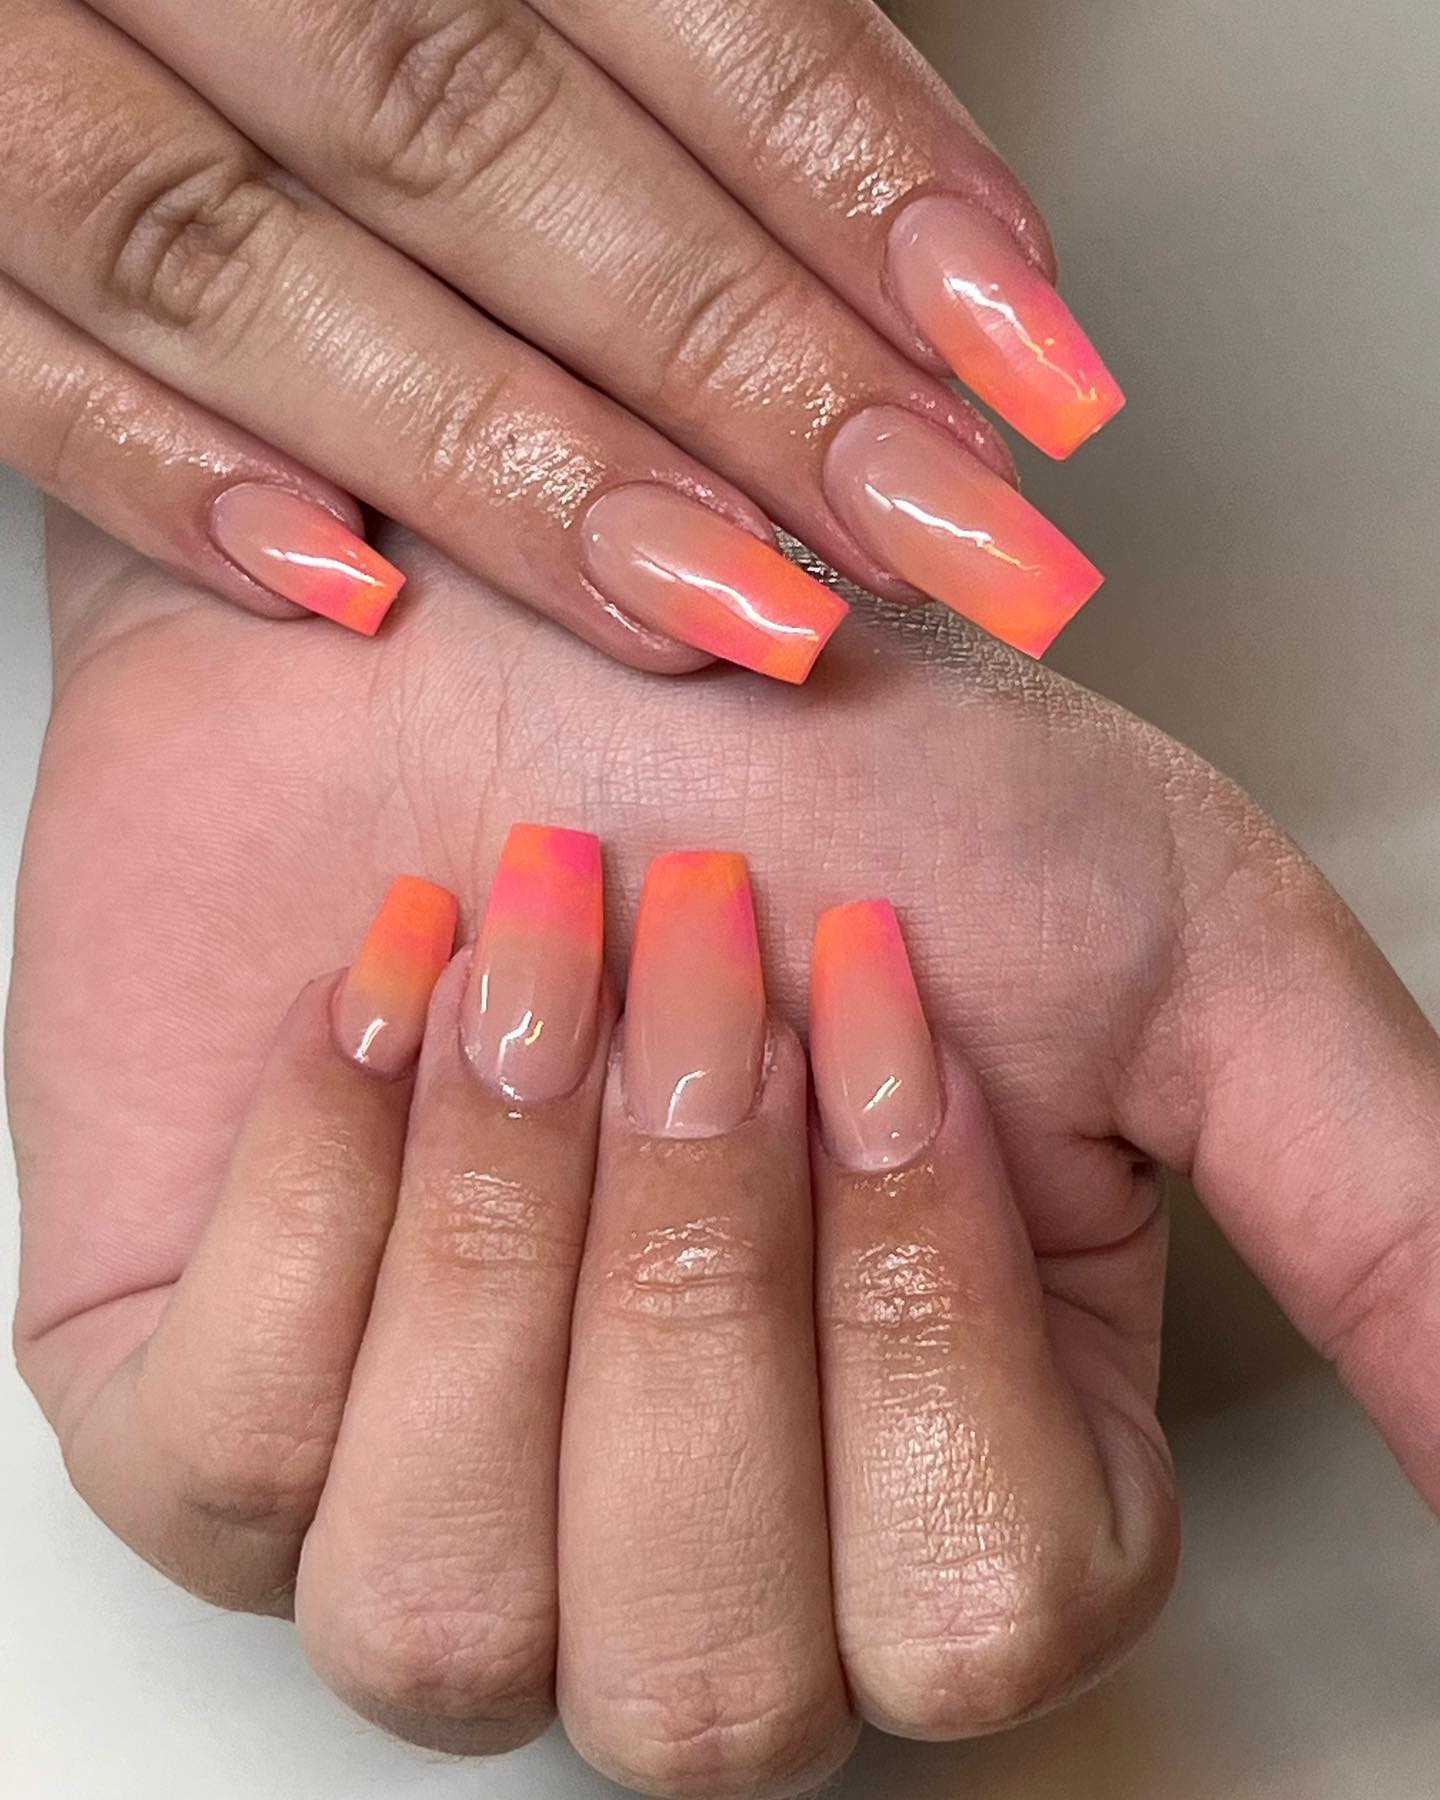 Cool ombré coffin nails that you can wear if you’re looking for the prettiest summer shade.